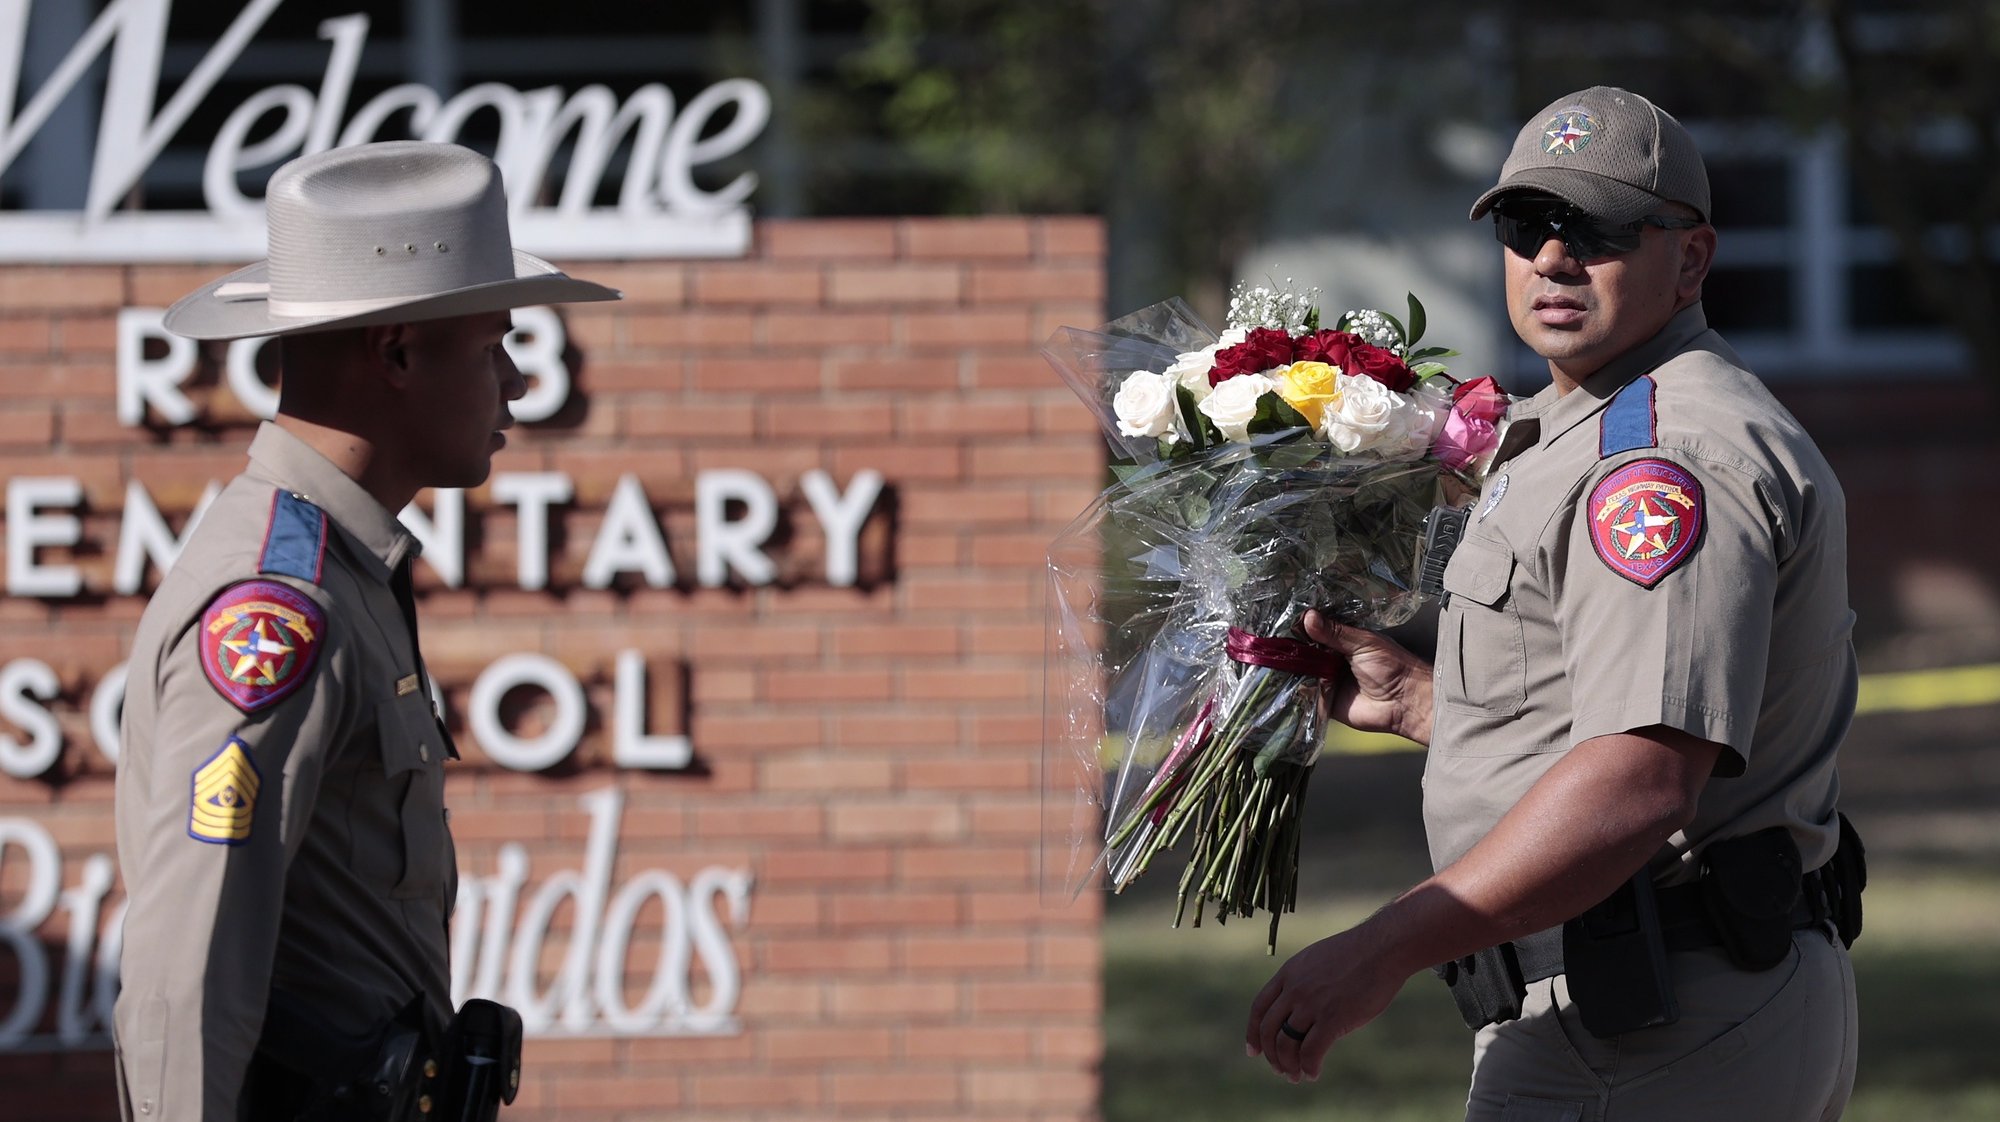 epa09974978 A Texas State Trooper carries flowers near the Robb Elementary School sign as police and investigators continue to work at the scene of a mass shooting at the school which killed 19 children and two adults according to Texas Governor Greg Abbott in Uvalde, Texas, USA, 25 May 2022. The eighteen-year-old gunman was killed by responding officers.  EPA/AARON M. SPRECHER